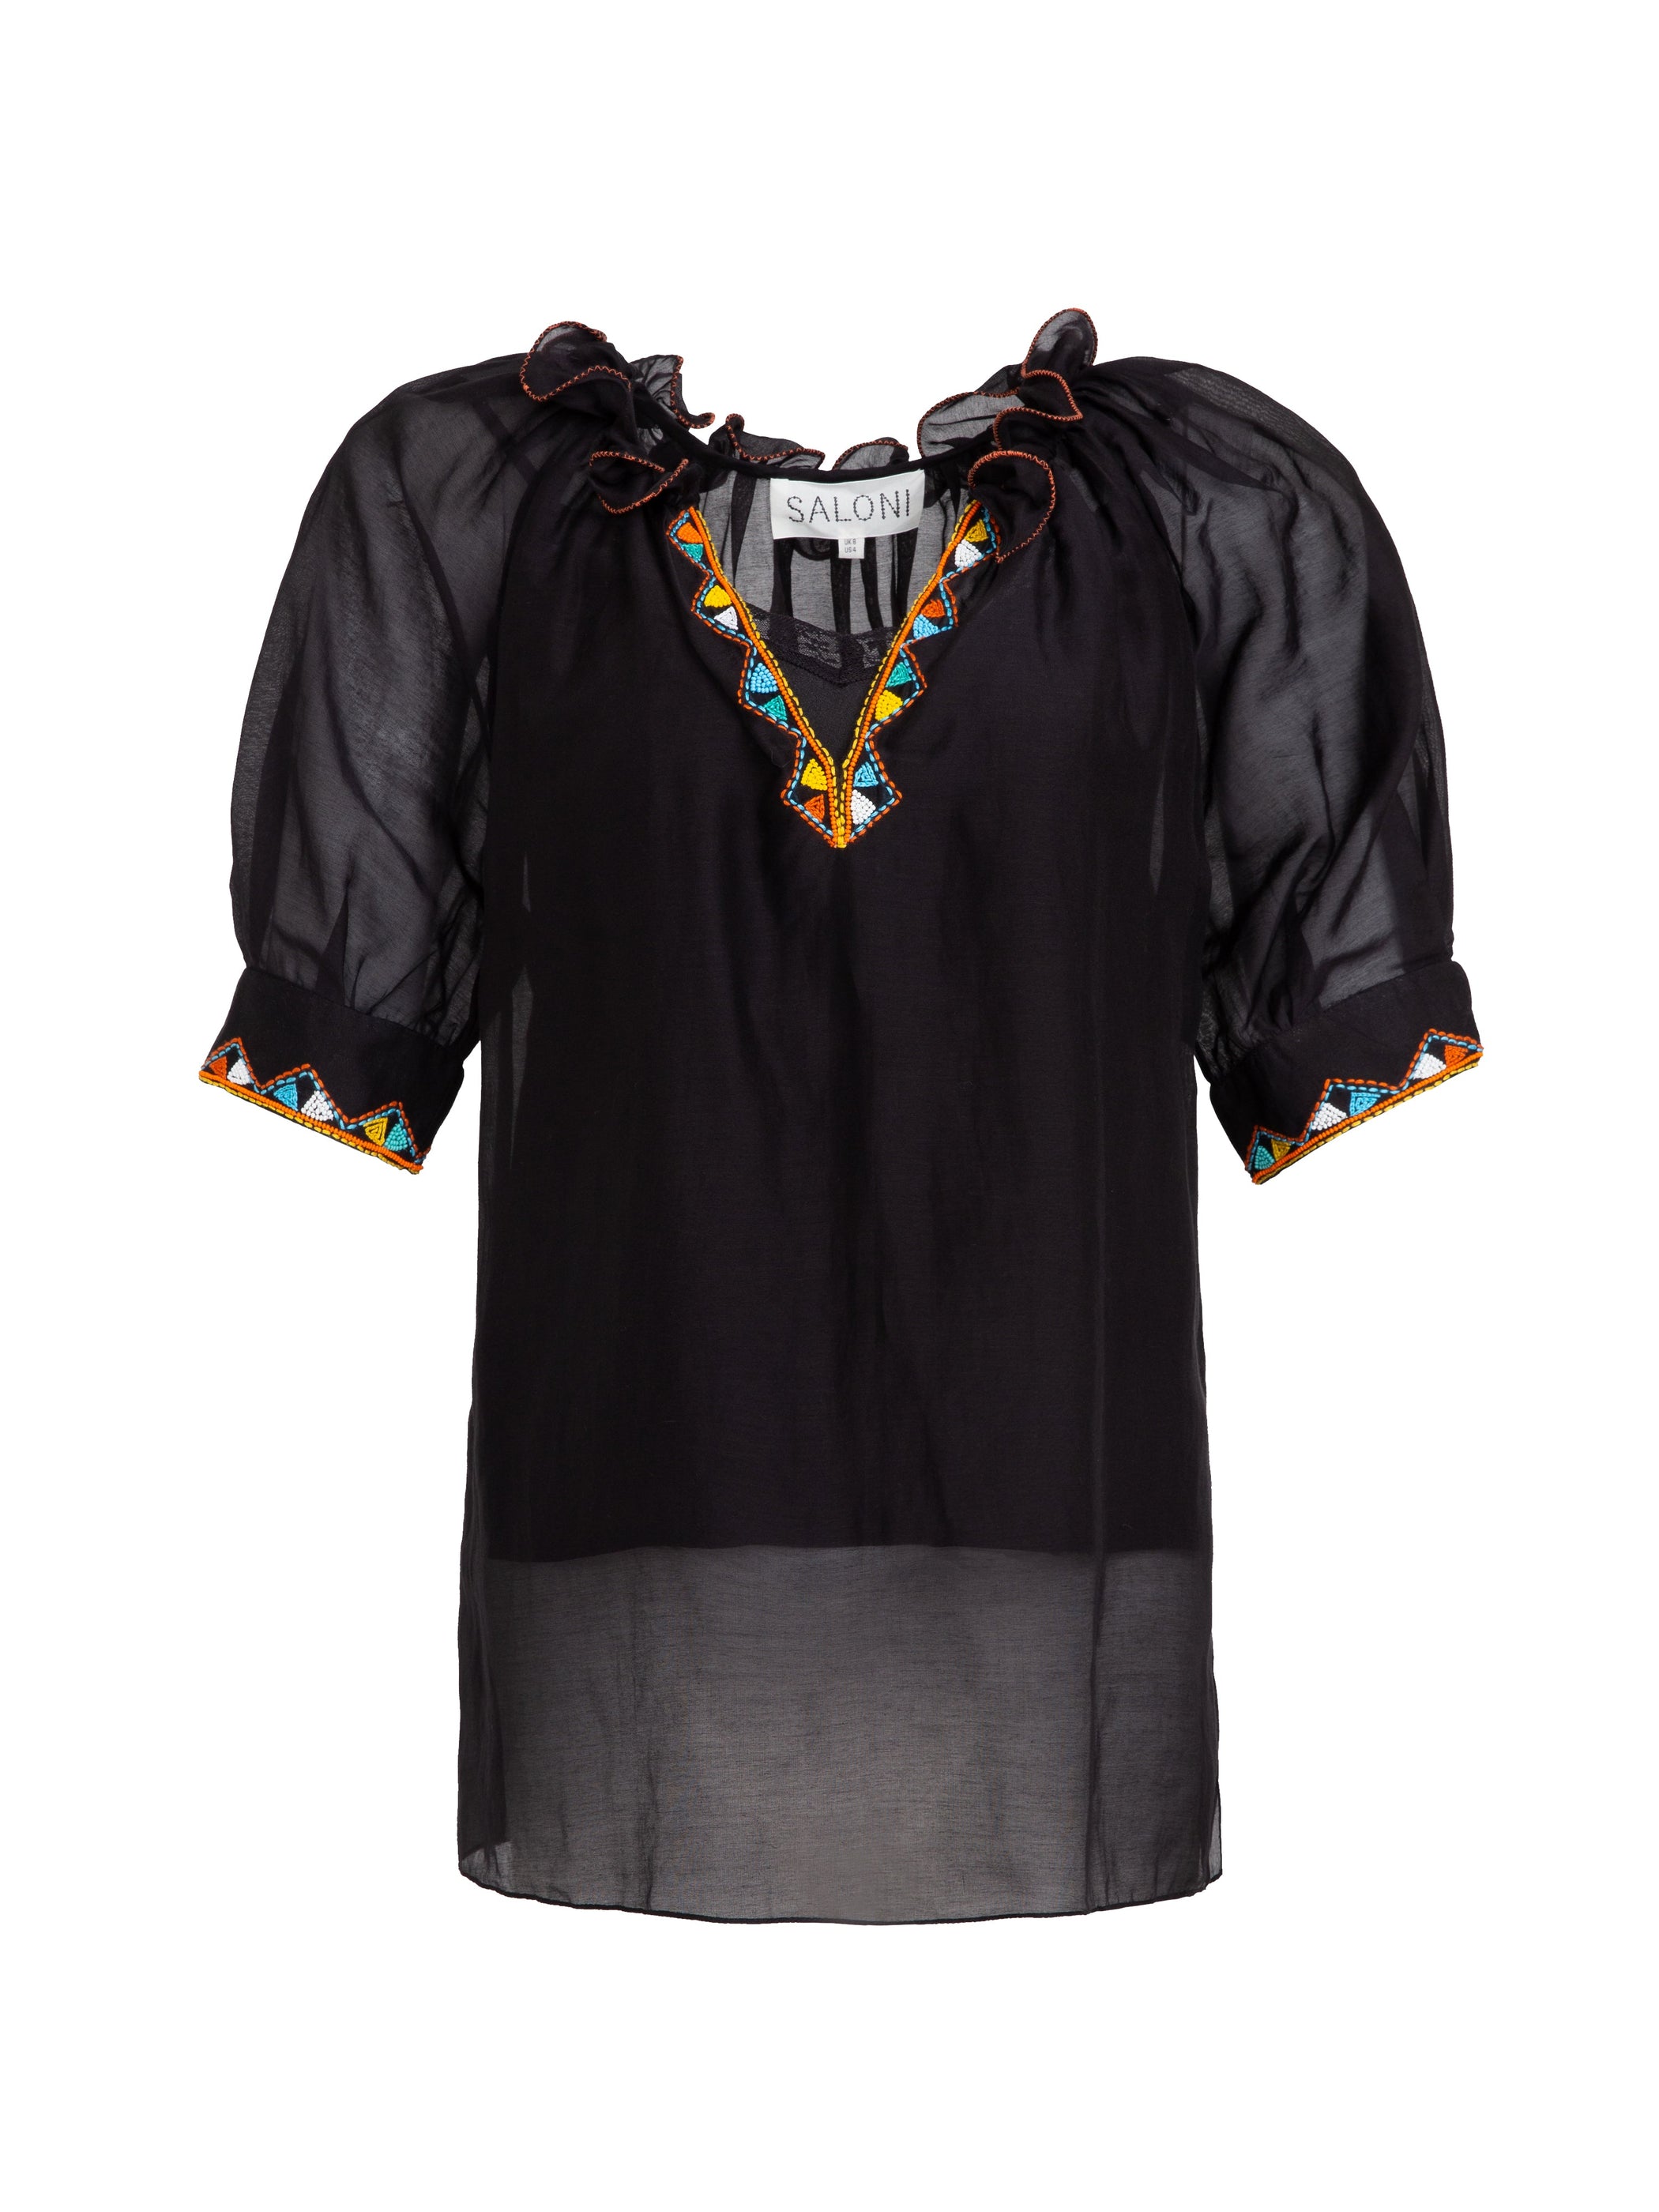 Josie Top in Black with Geo Embroidery